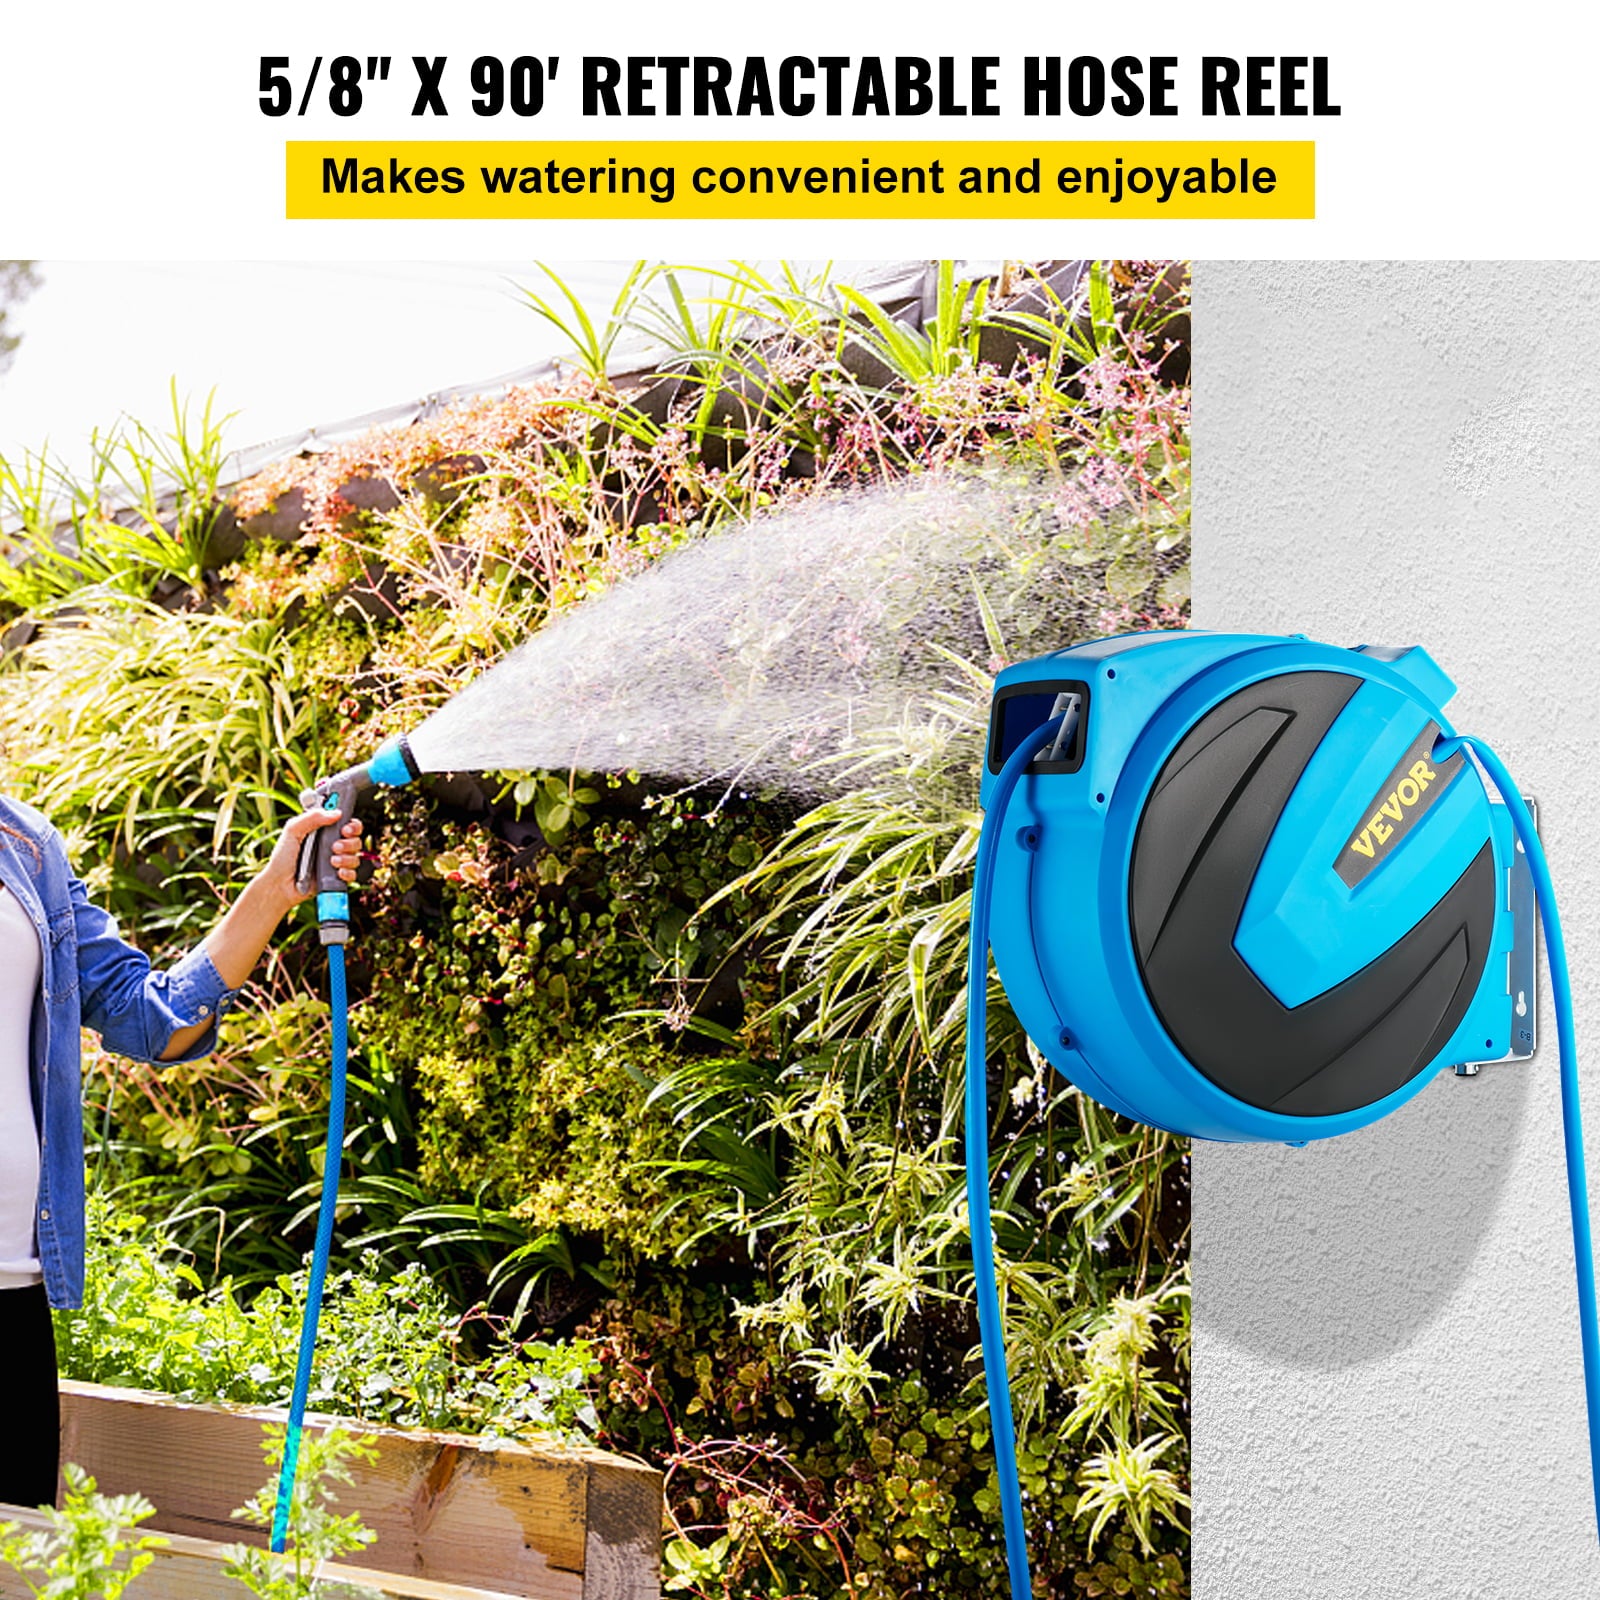 VEVOR Retractable Hose Reel， 5/8 inch x 90 ft， Any Length Lock and Automatic Rewind Water Hose， Wall Mounted Garden Hose Reel With 180° Swivel Bracket and 7 Pattern Hose Nozzle， Blue